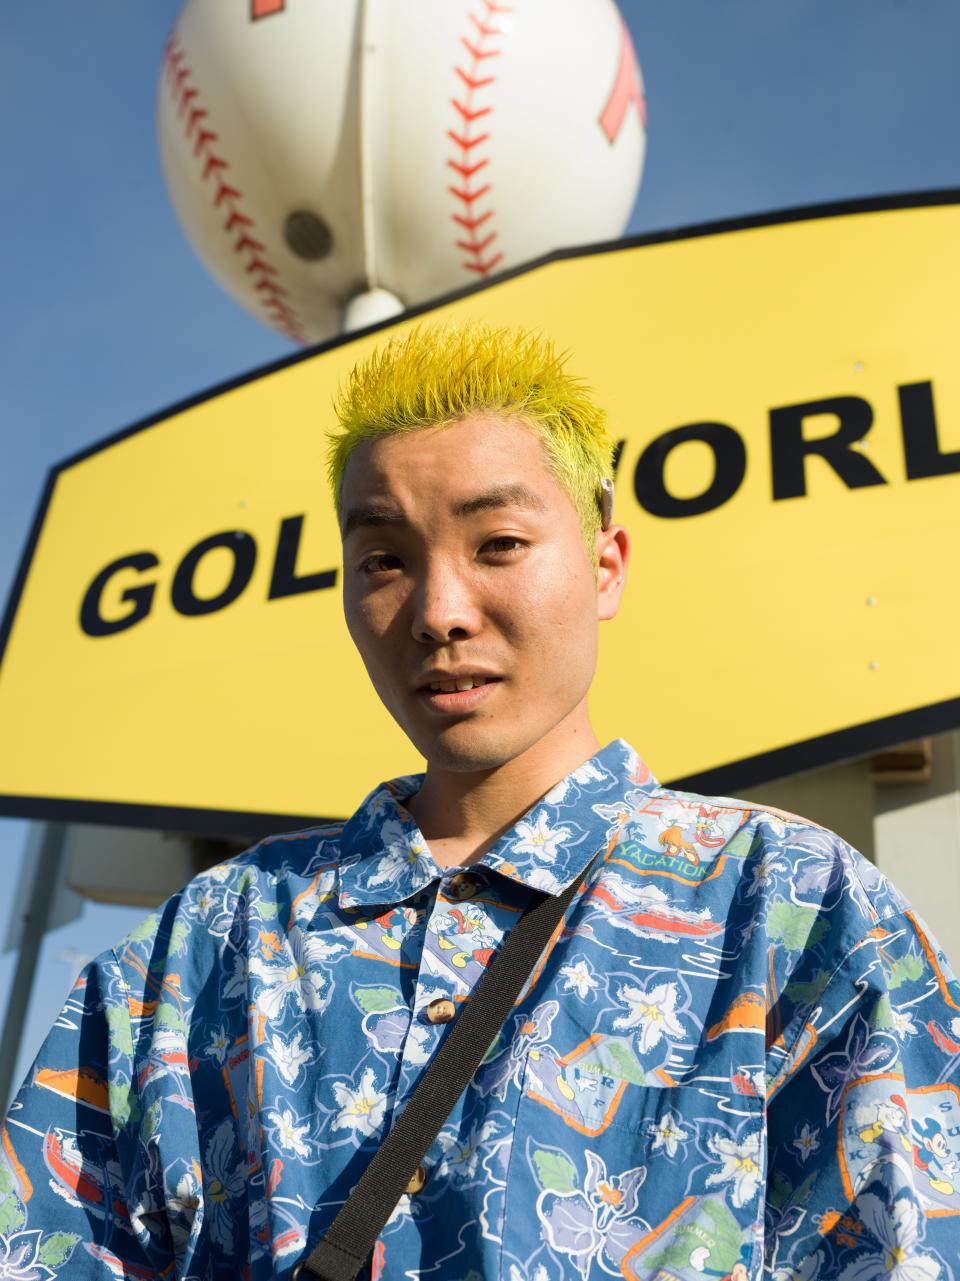 Sota, 22
Born in Nagano, Japan, Sota has lived in Amsterdam for the past five years, and hopes to open a ramen shop there one day. “I especially think about colors,” he says about his style. He can’t wait to see The Internet and Thundercat later in the day.